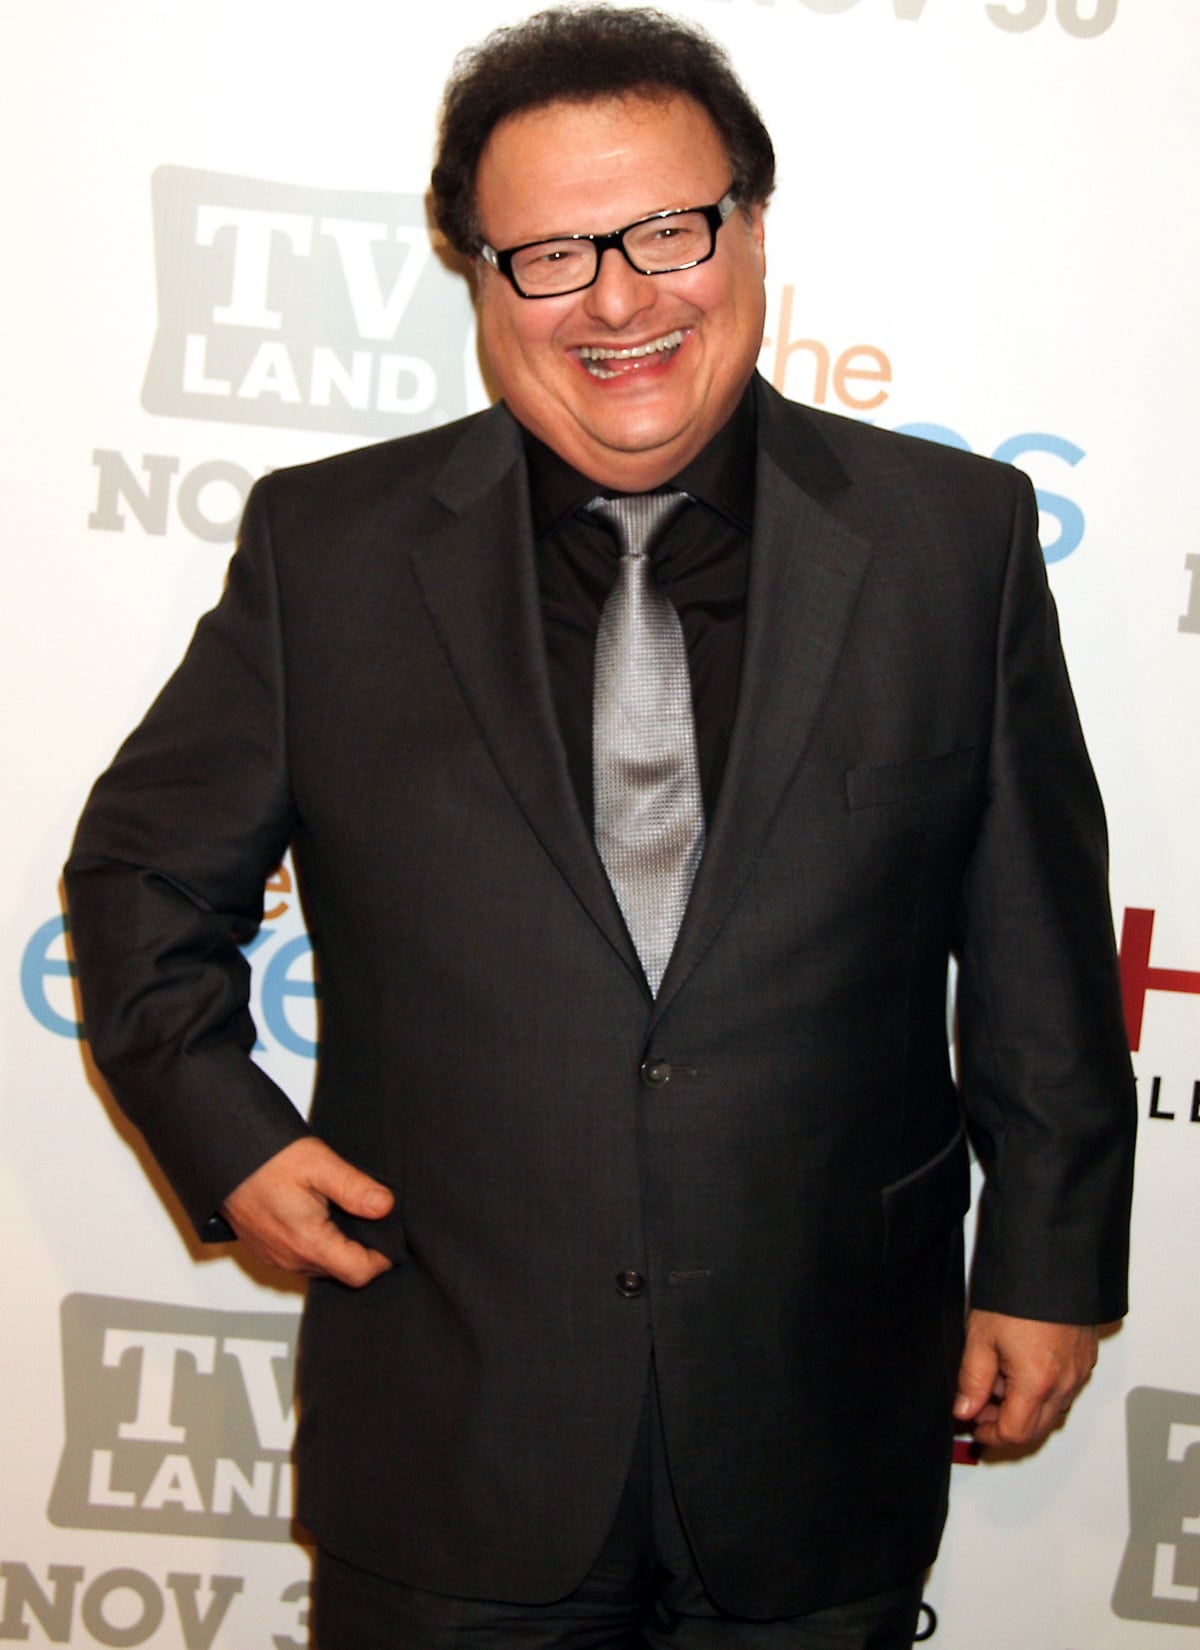 Wayne Knight portrayed Newman, and he has an estimated net worth of $8 million